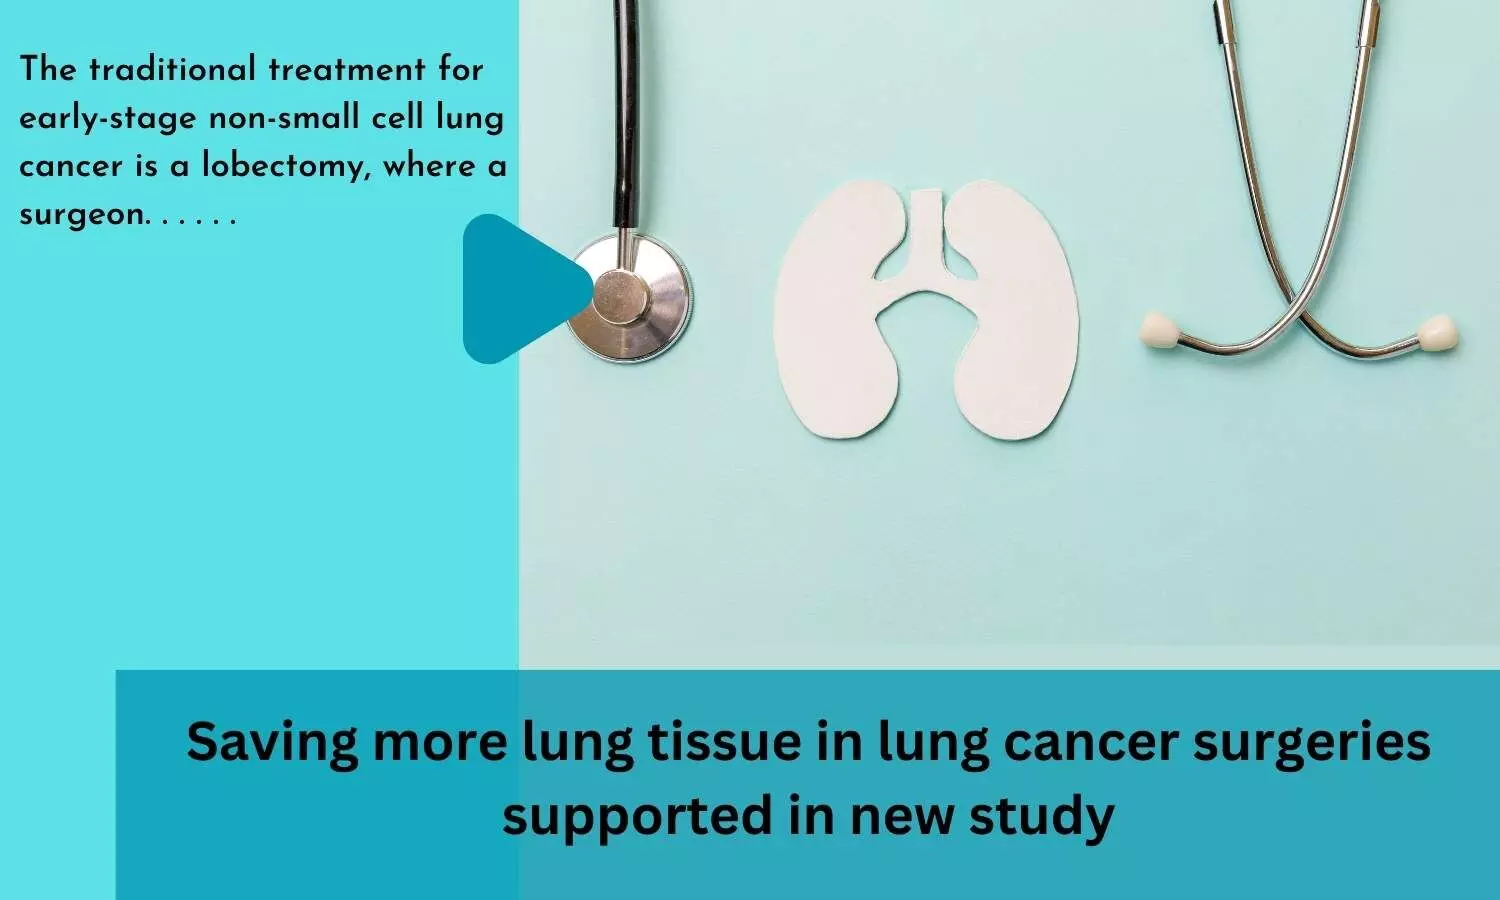 Saving more lung tissue in lung cancer surgeries supported in new study